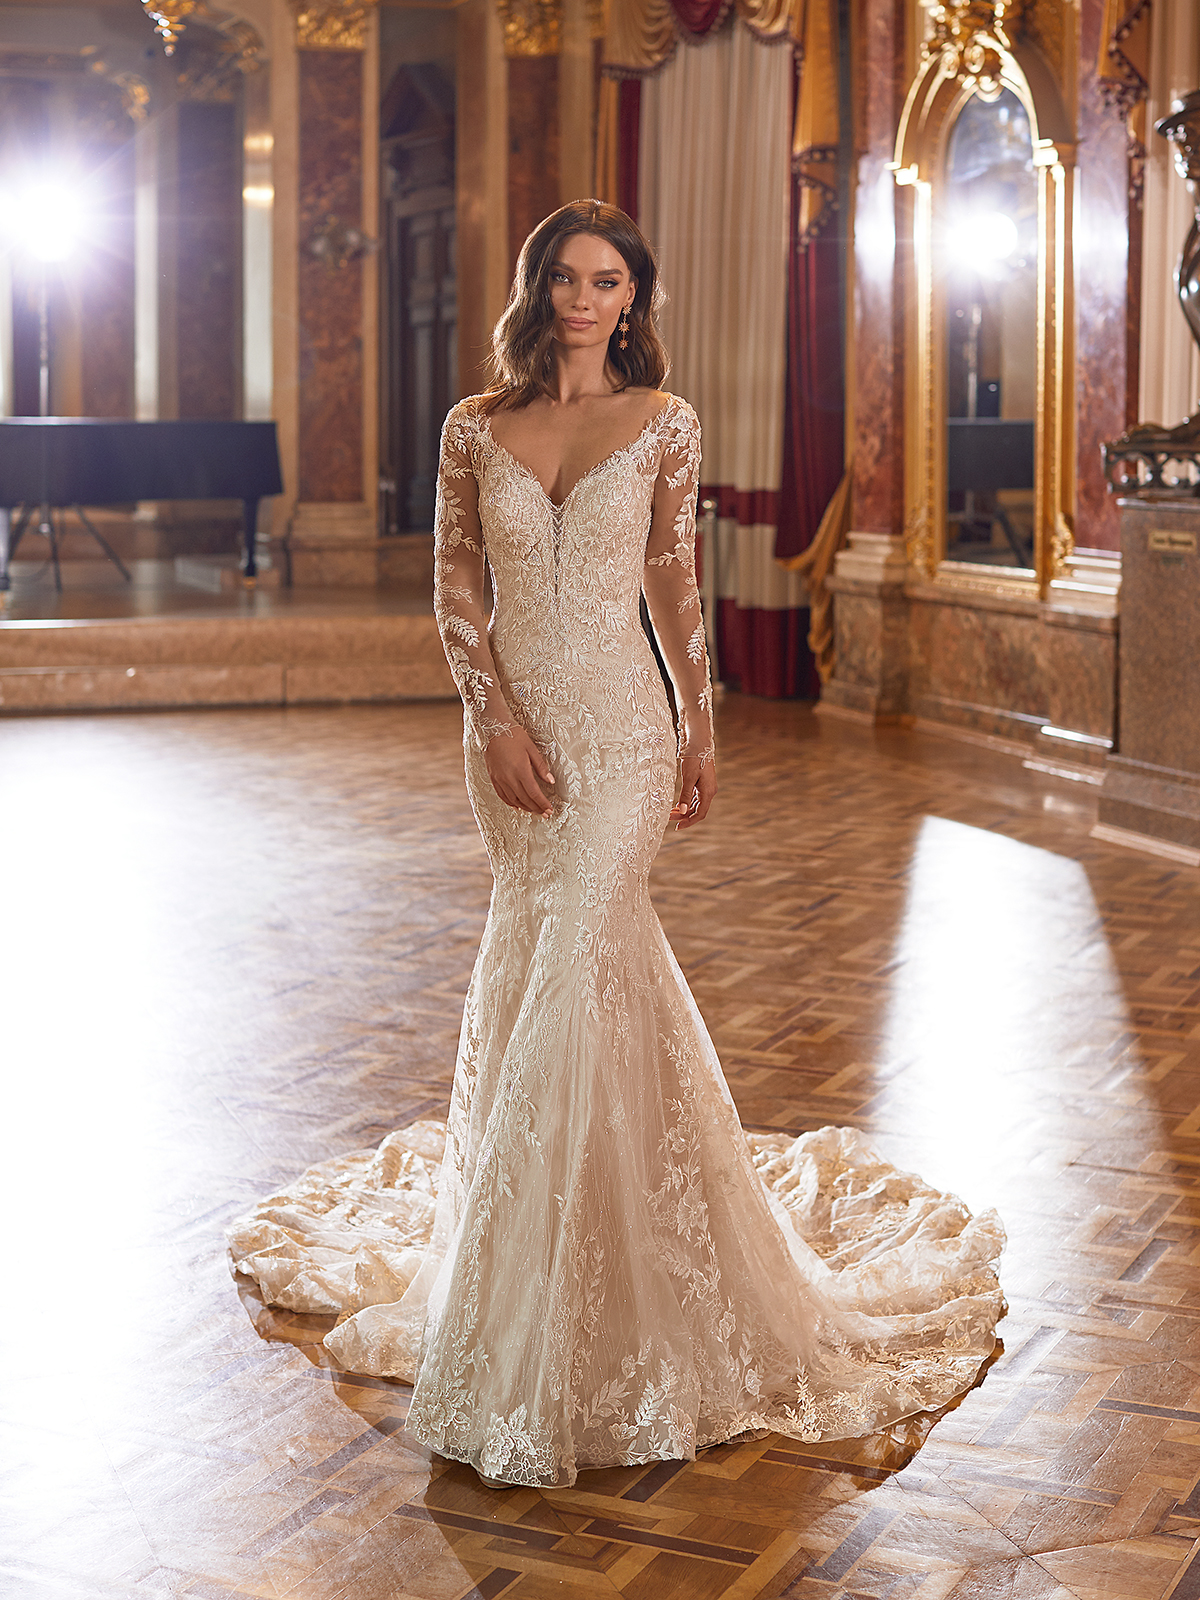 New Bridal Styles - Couture Fall 2020 Wedding Dresses